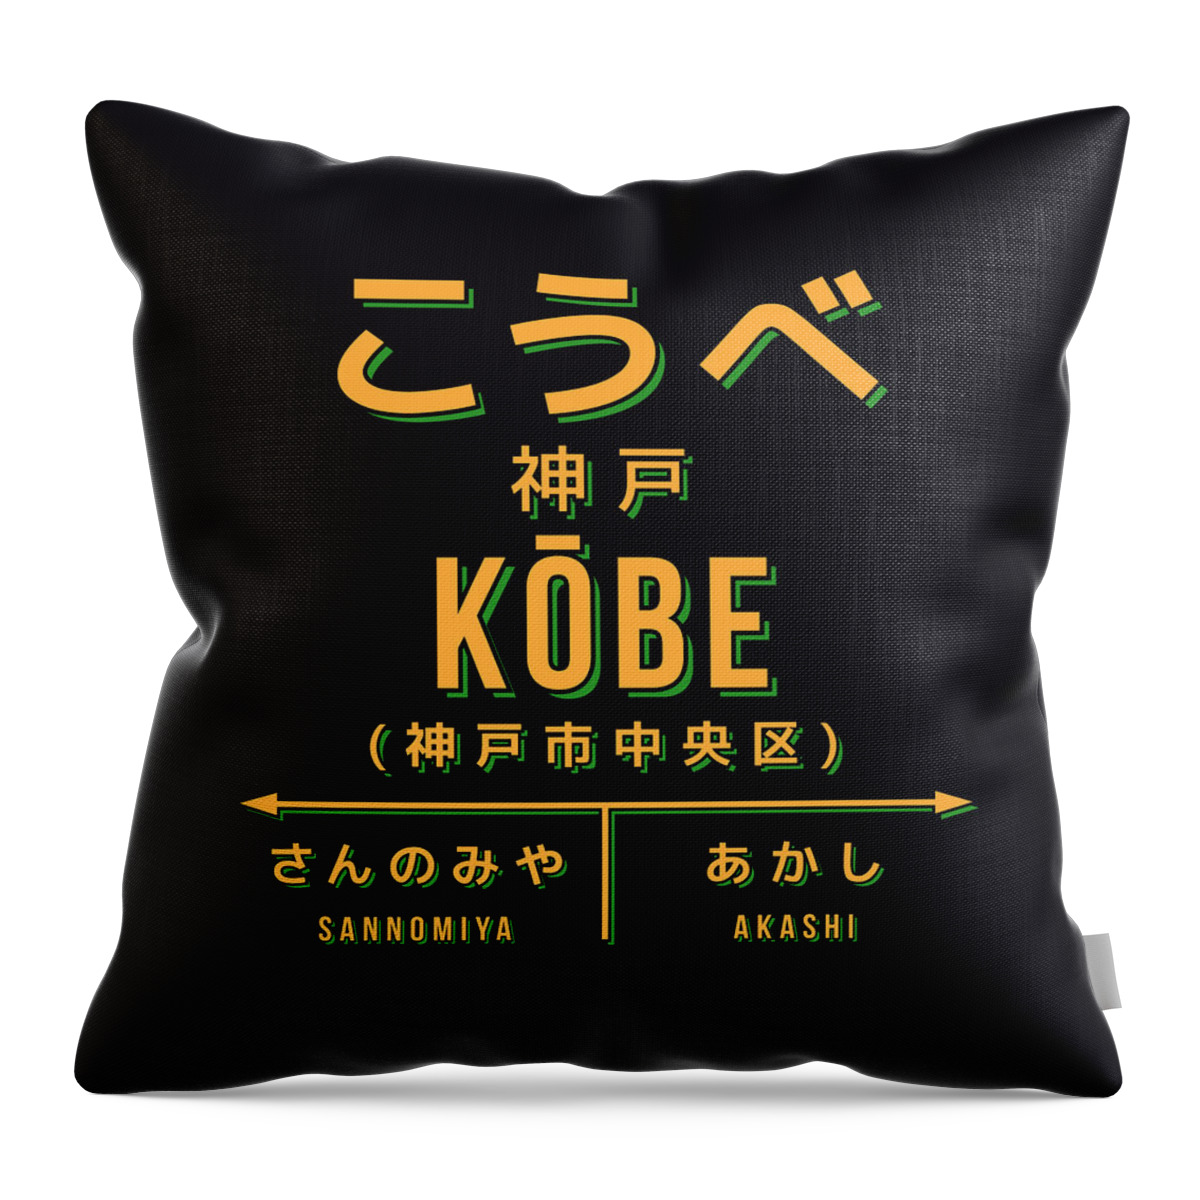 Japan Throw Pillow featuring the digital art Vintage Japan Train Station Sign - Kobe Black by Organic Synthesis